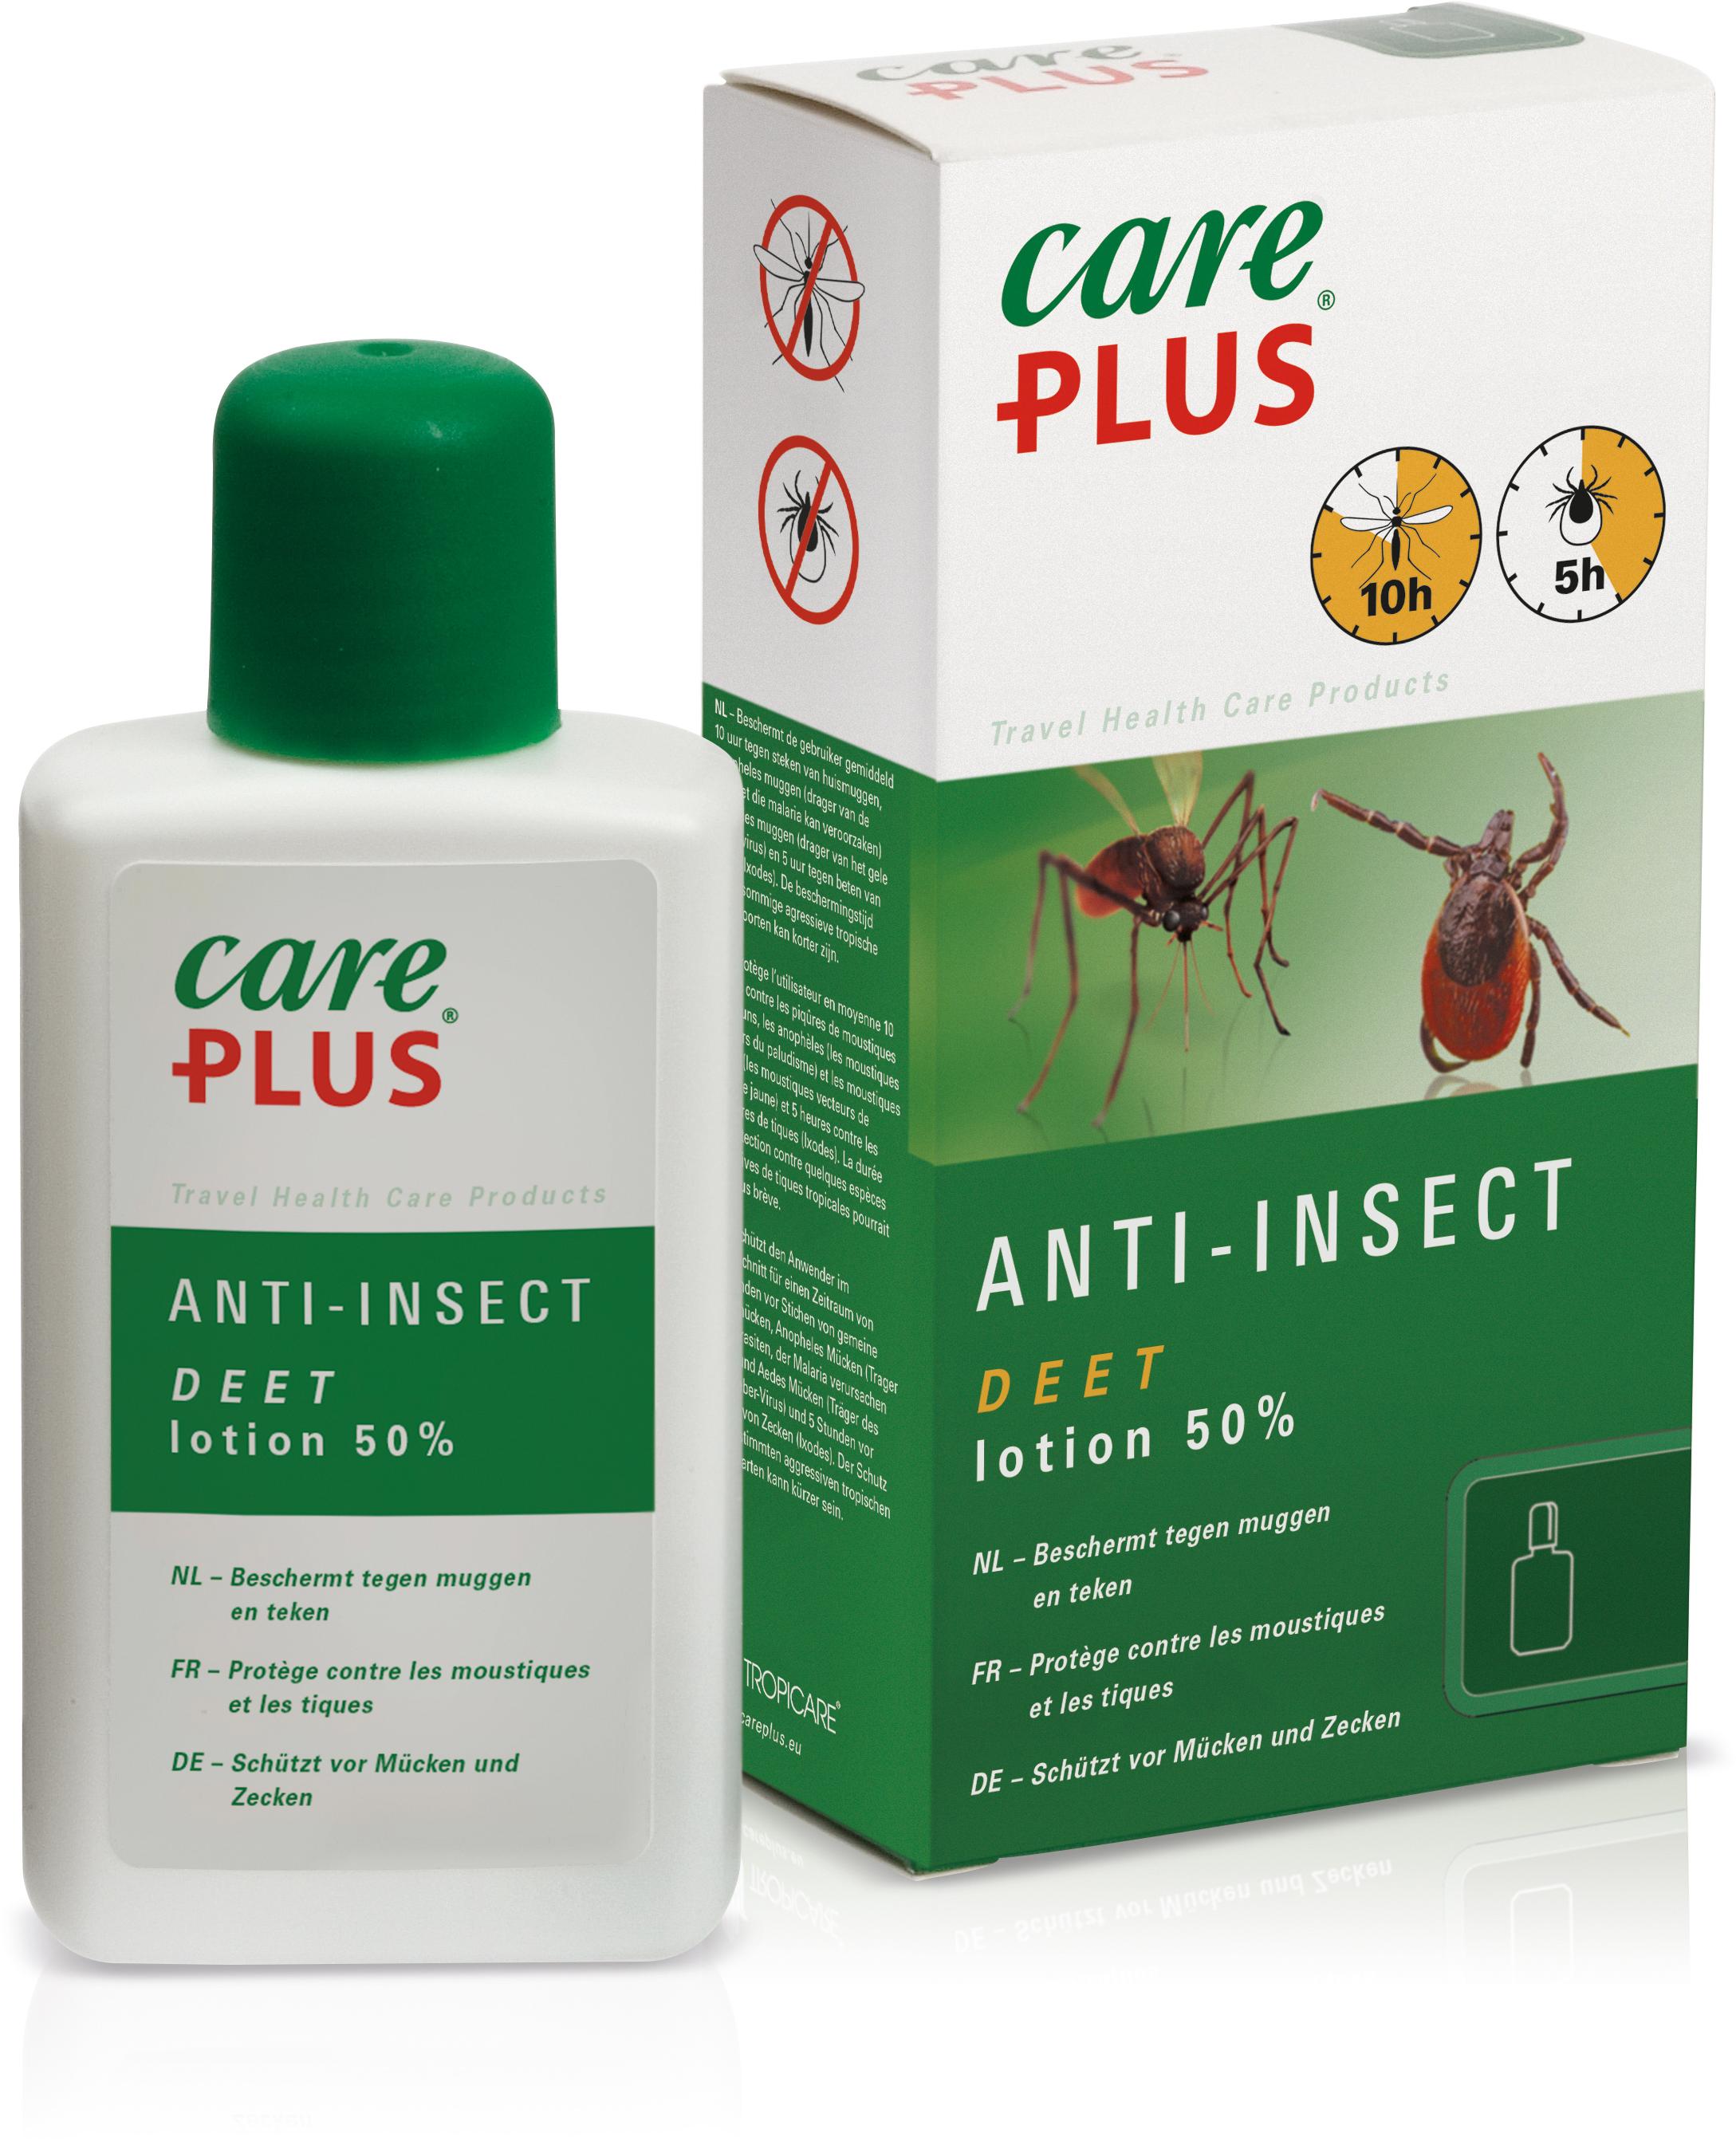 Anti-Insect Deet 50% lotion, 50 ml